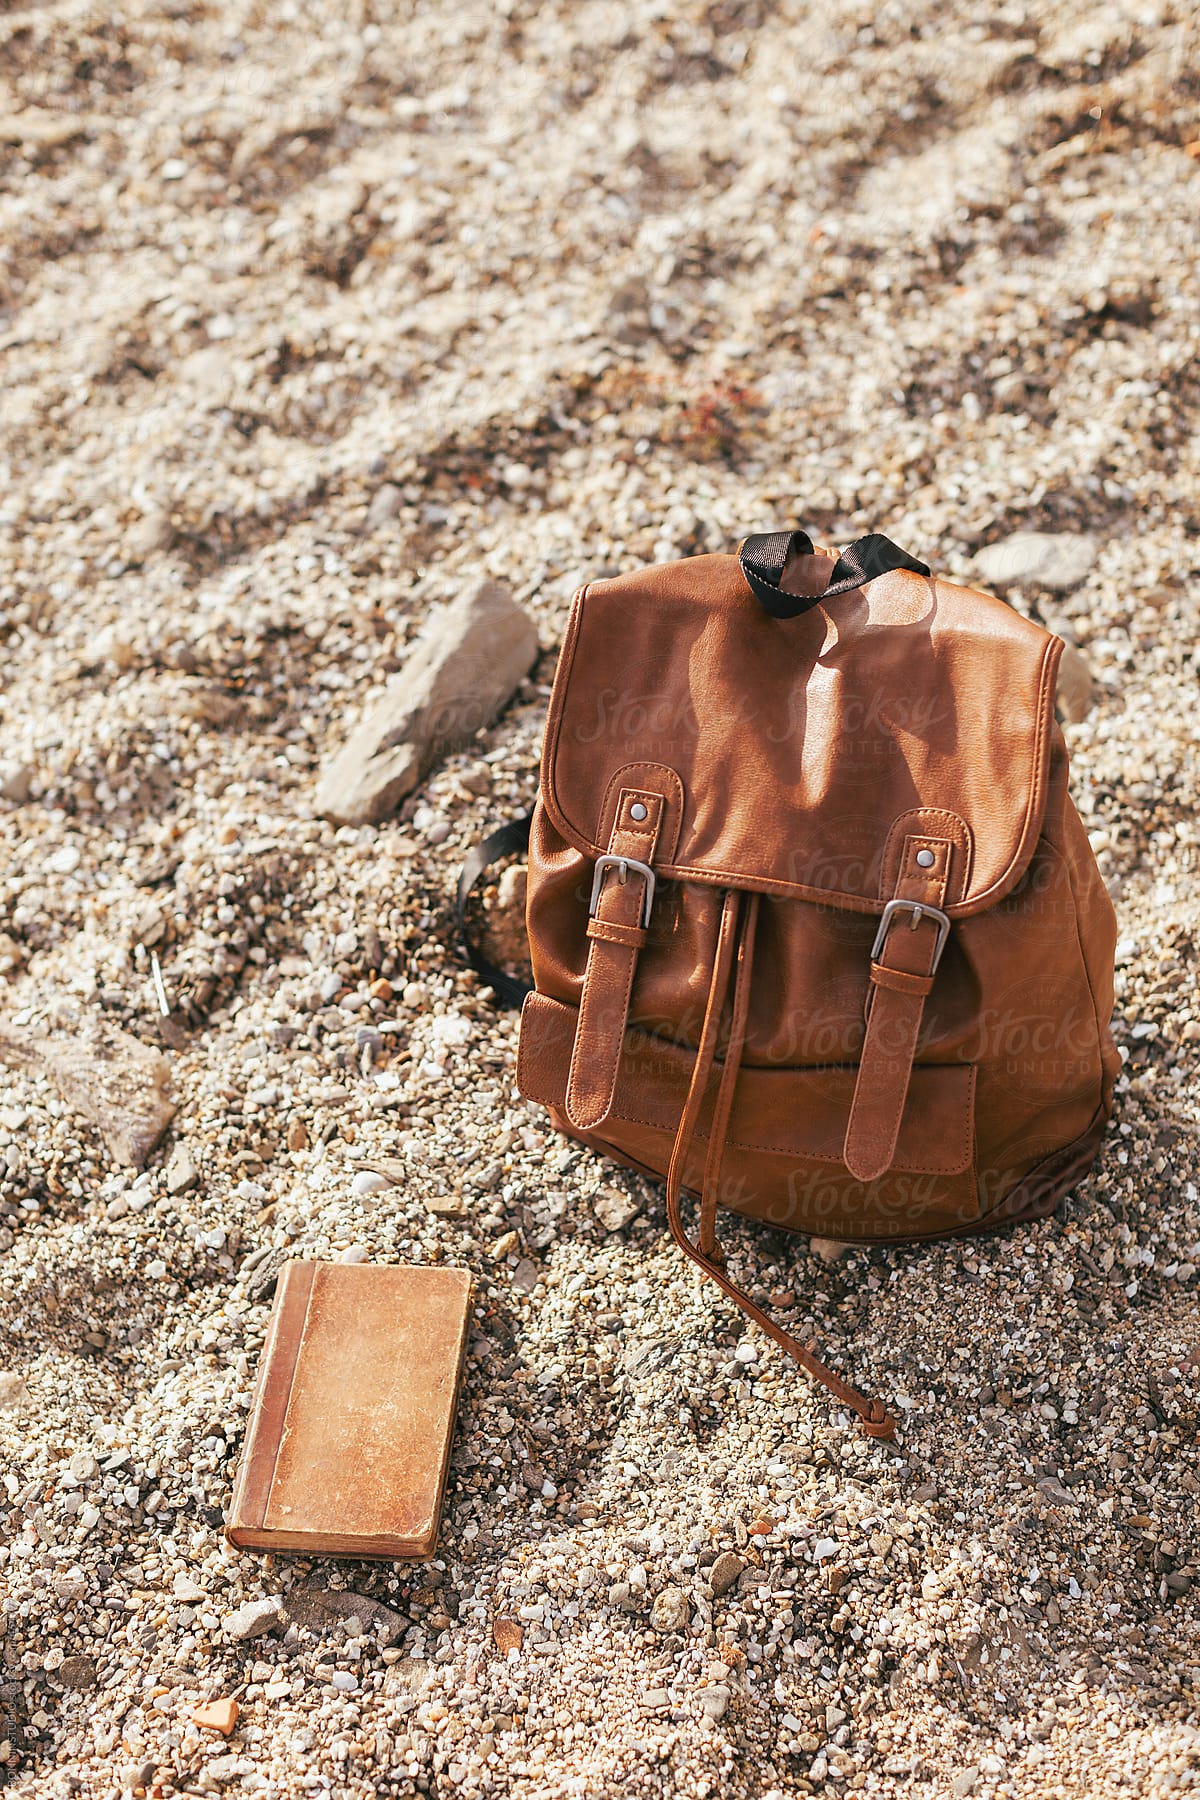 Leather backpack and old book in the sand of the beach.